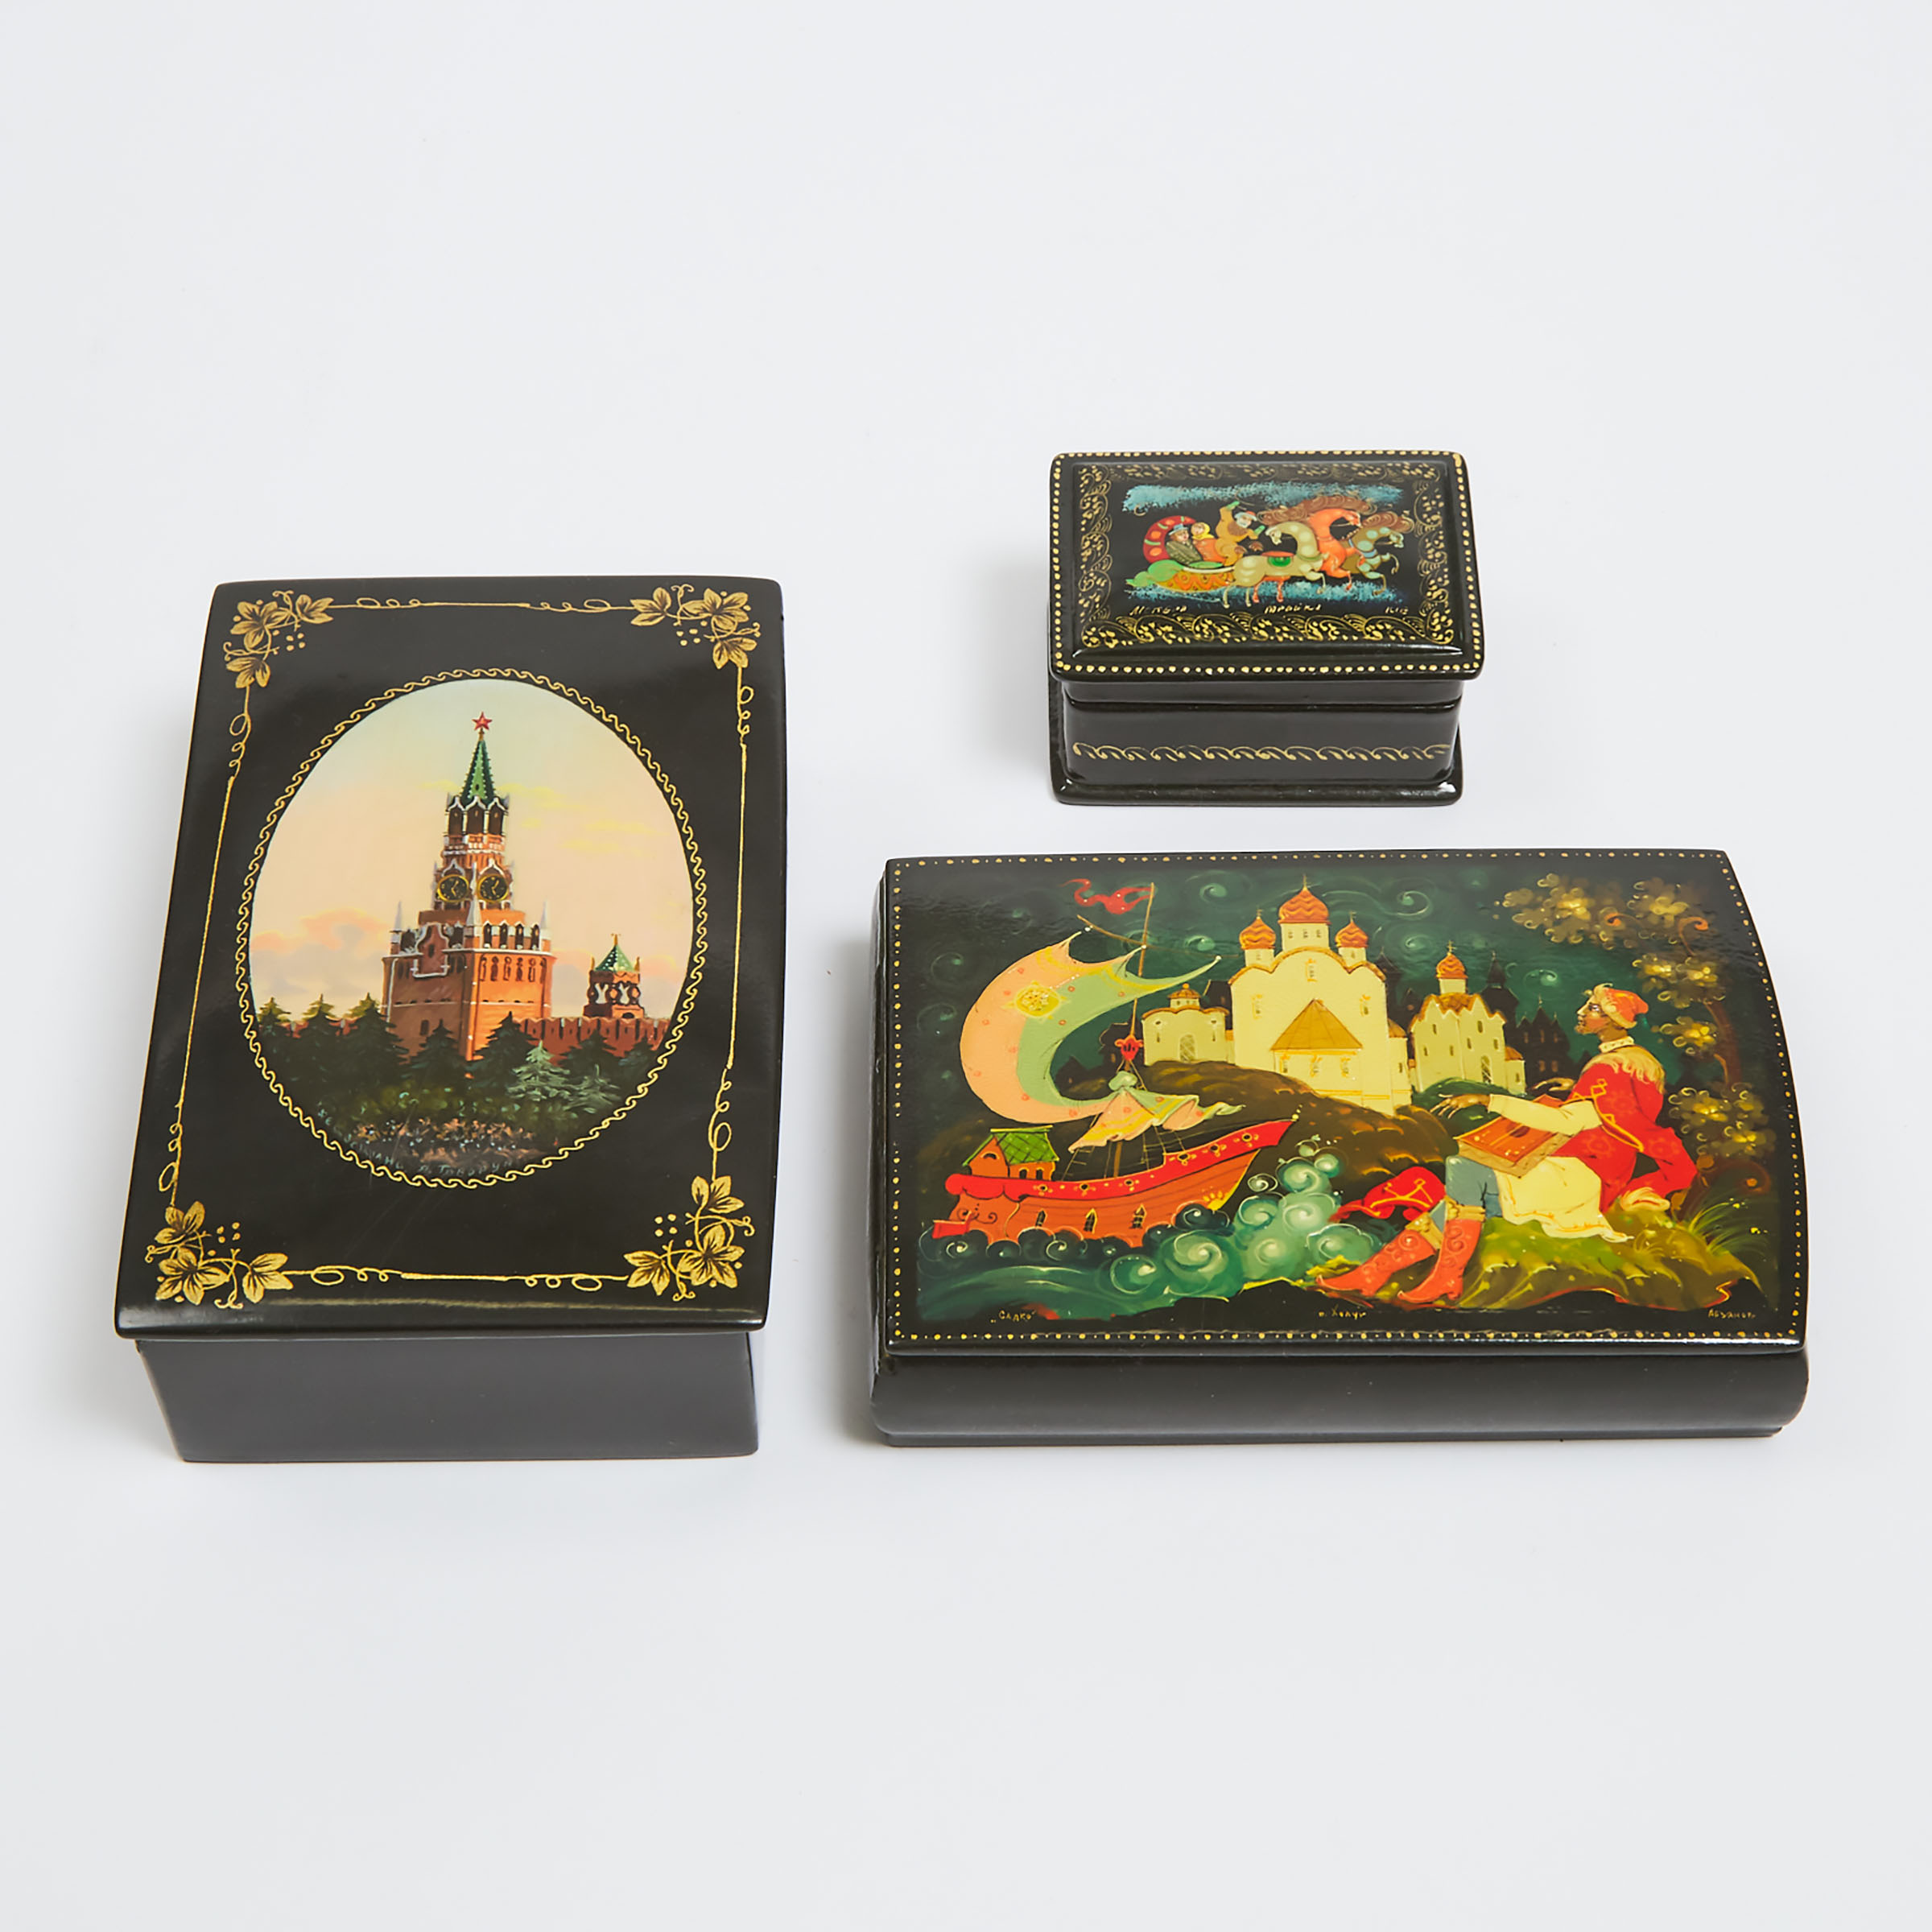 Three Soviet Russian Lacquered Boxes, Palekh and Kholuy, mid 20th century